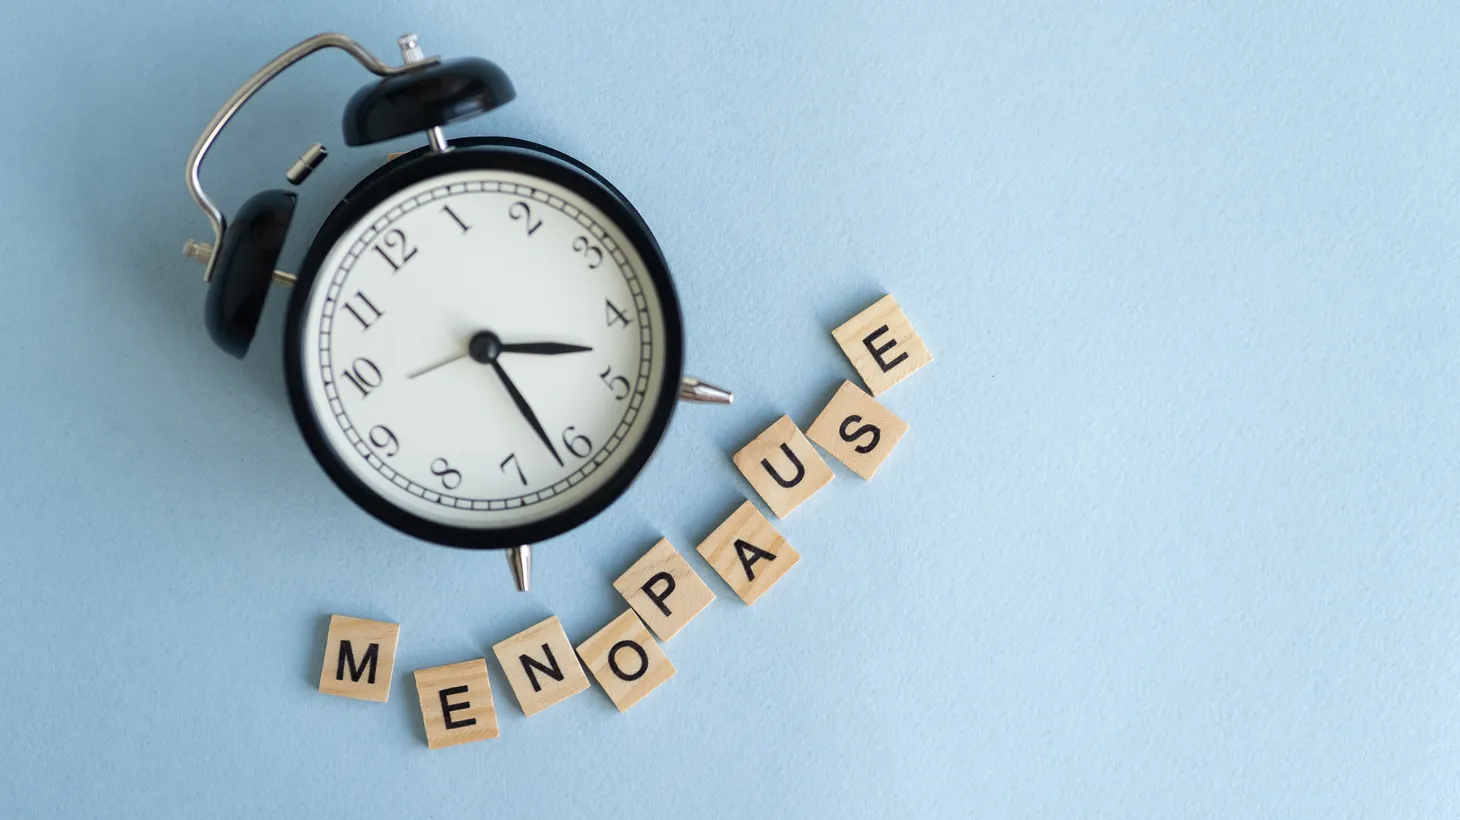 Menopause starts around age 51 on average, and brings a serious drop in estrogen levels, affecting the body from head to toe, says Dr. Somi Javaid, a board-certified OB-GYN.